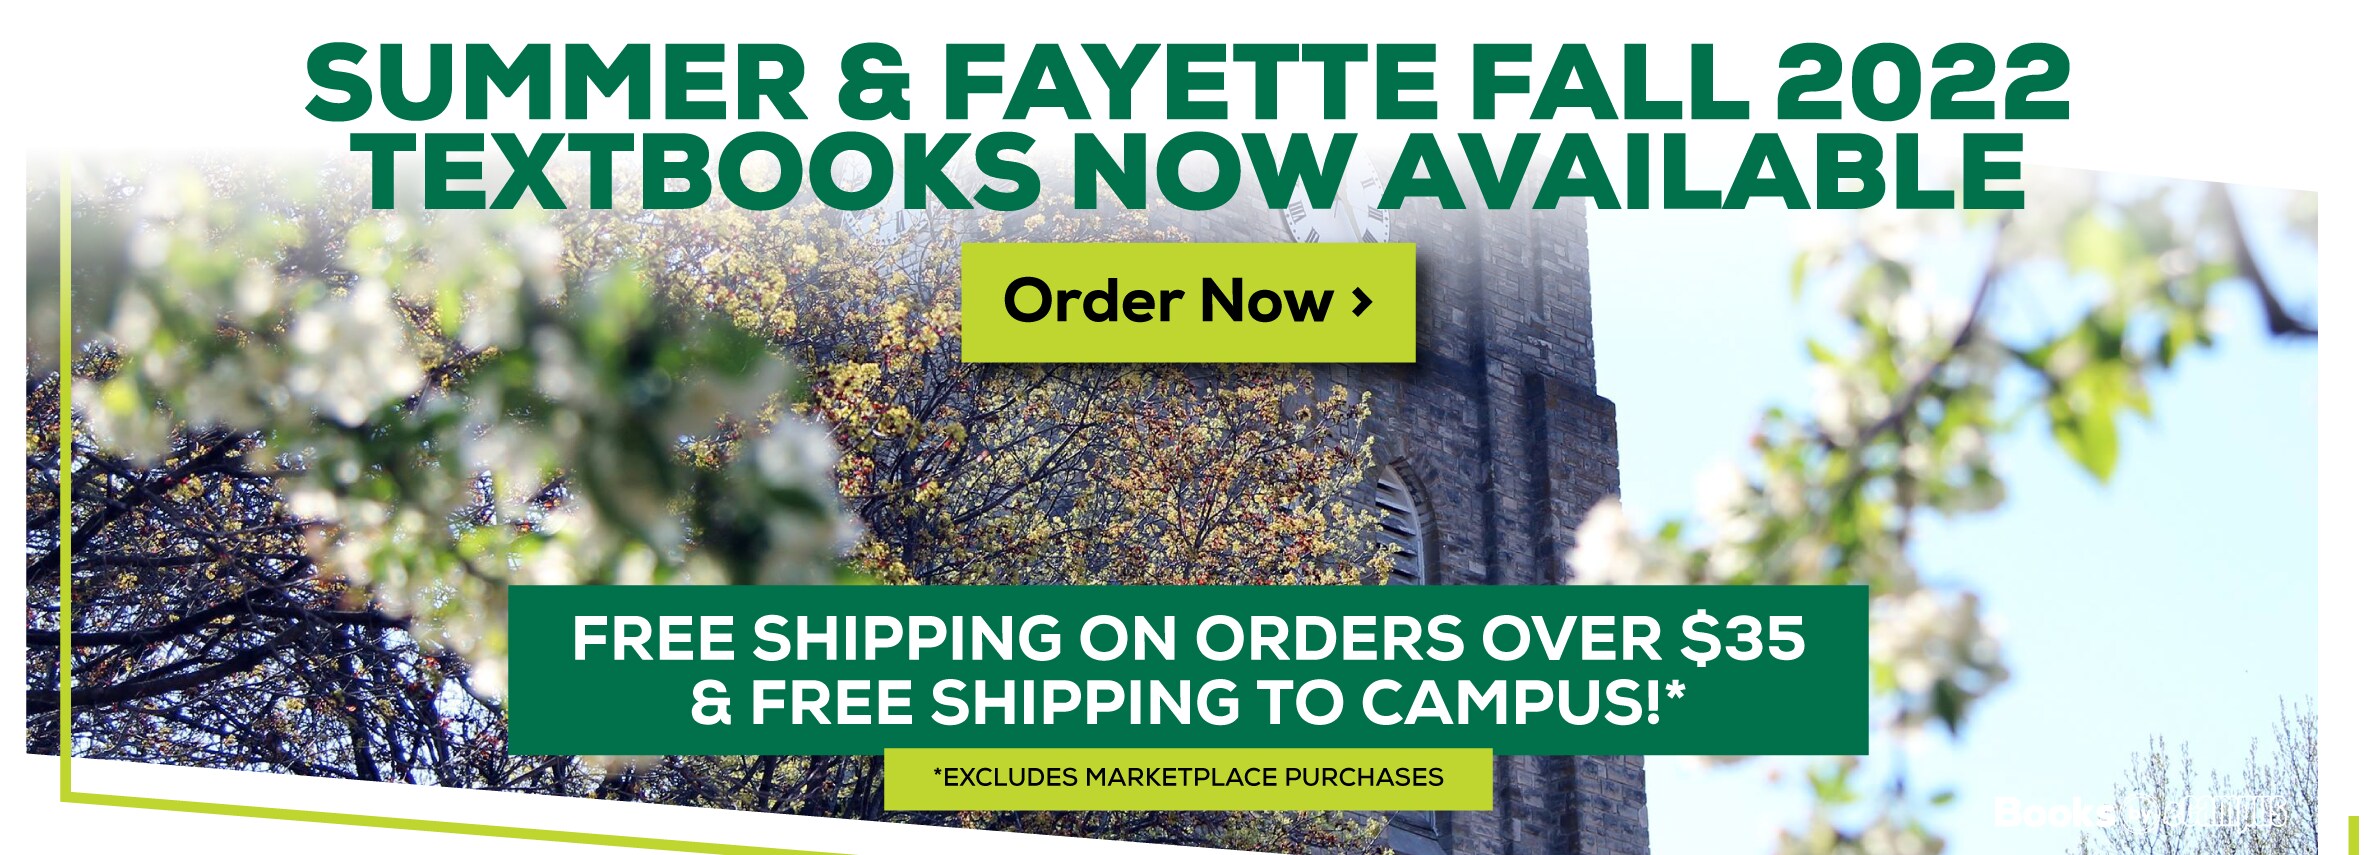 Summer & Fayette Fall 2022 Textbooks Now Available. Free shipping on all orders over $35 and free shipping to campus! Excludes marketplace purchases. Order Now.